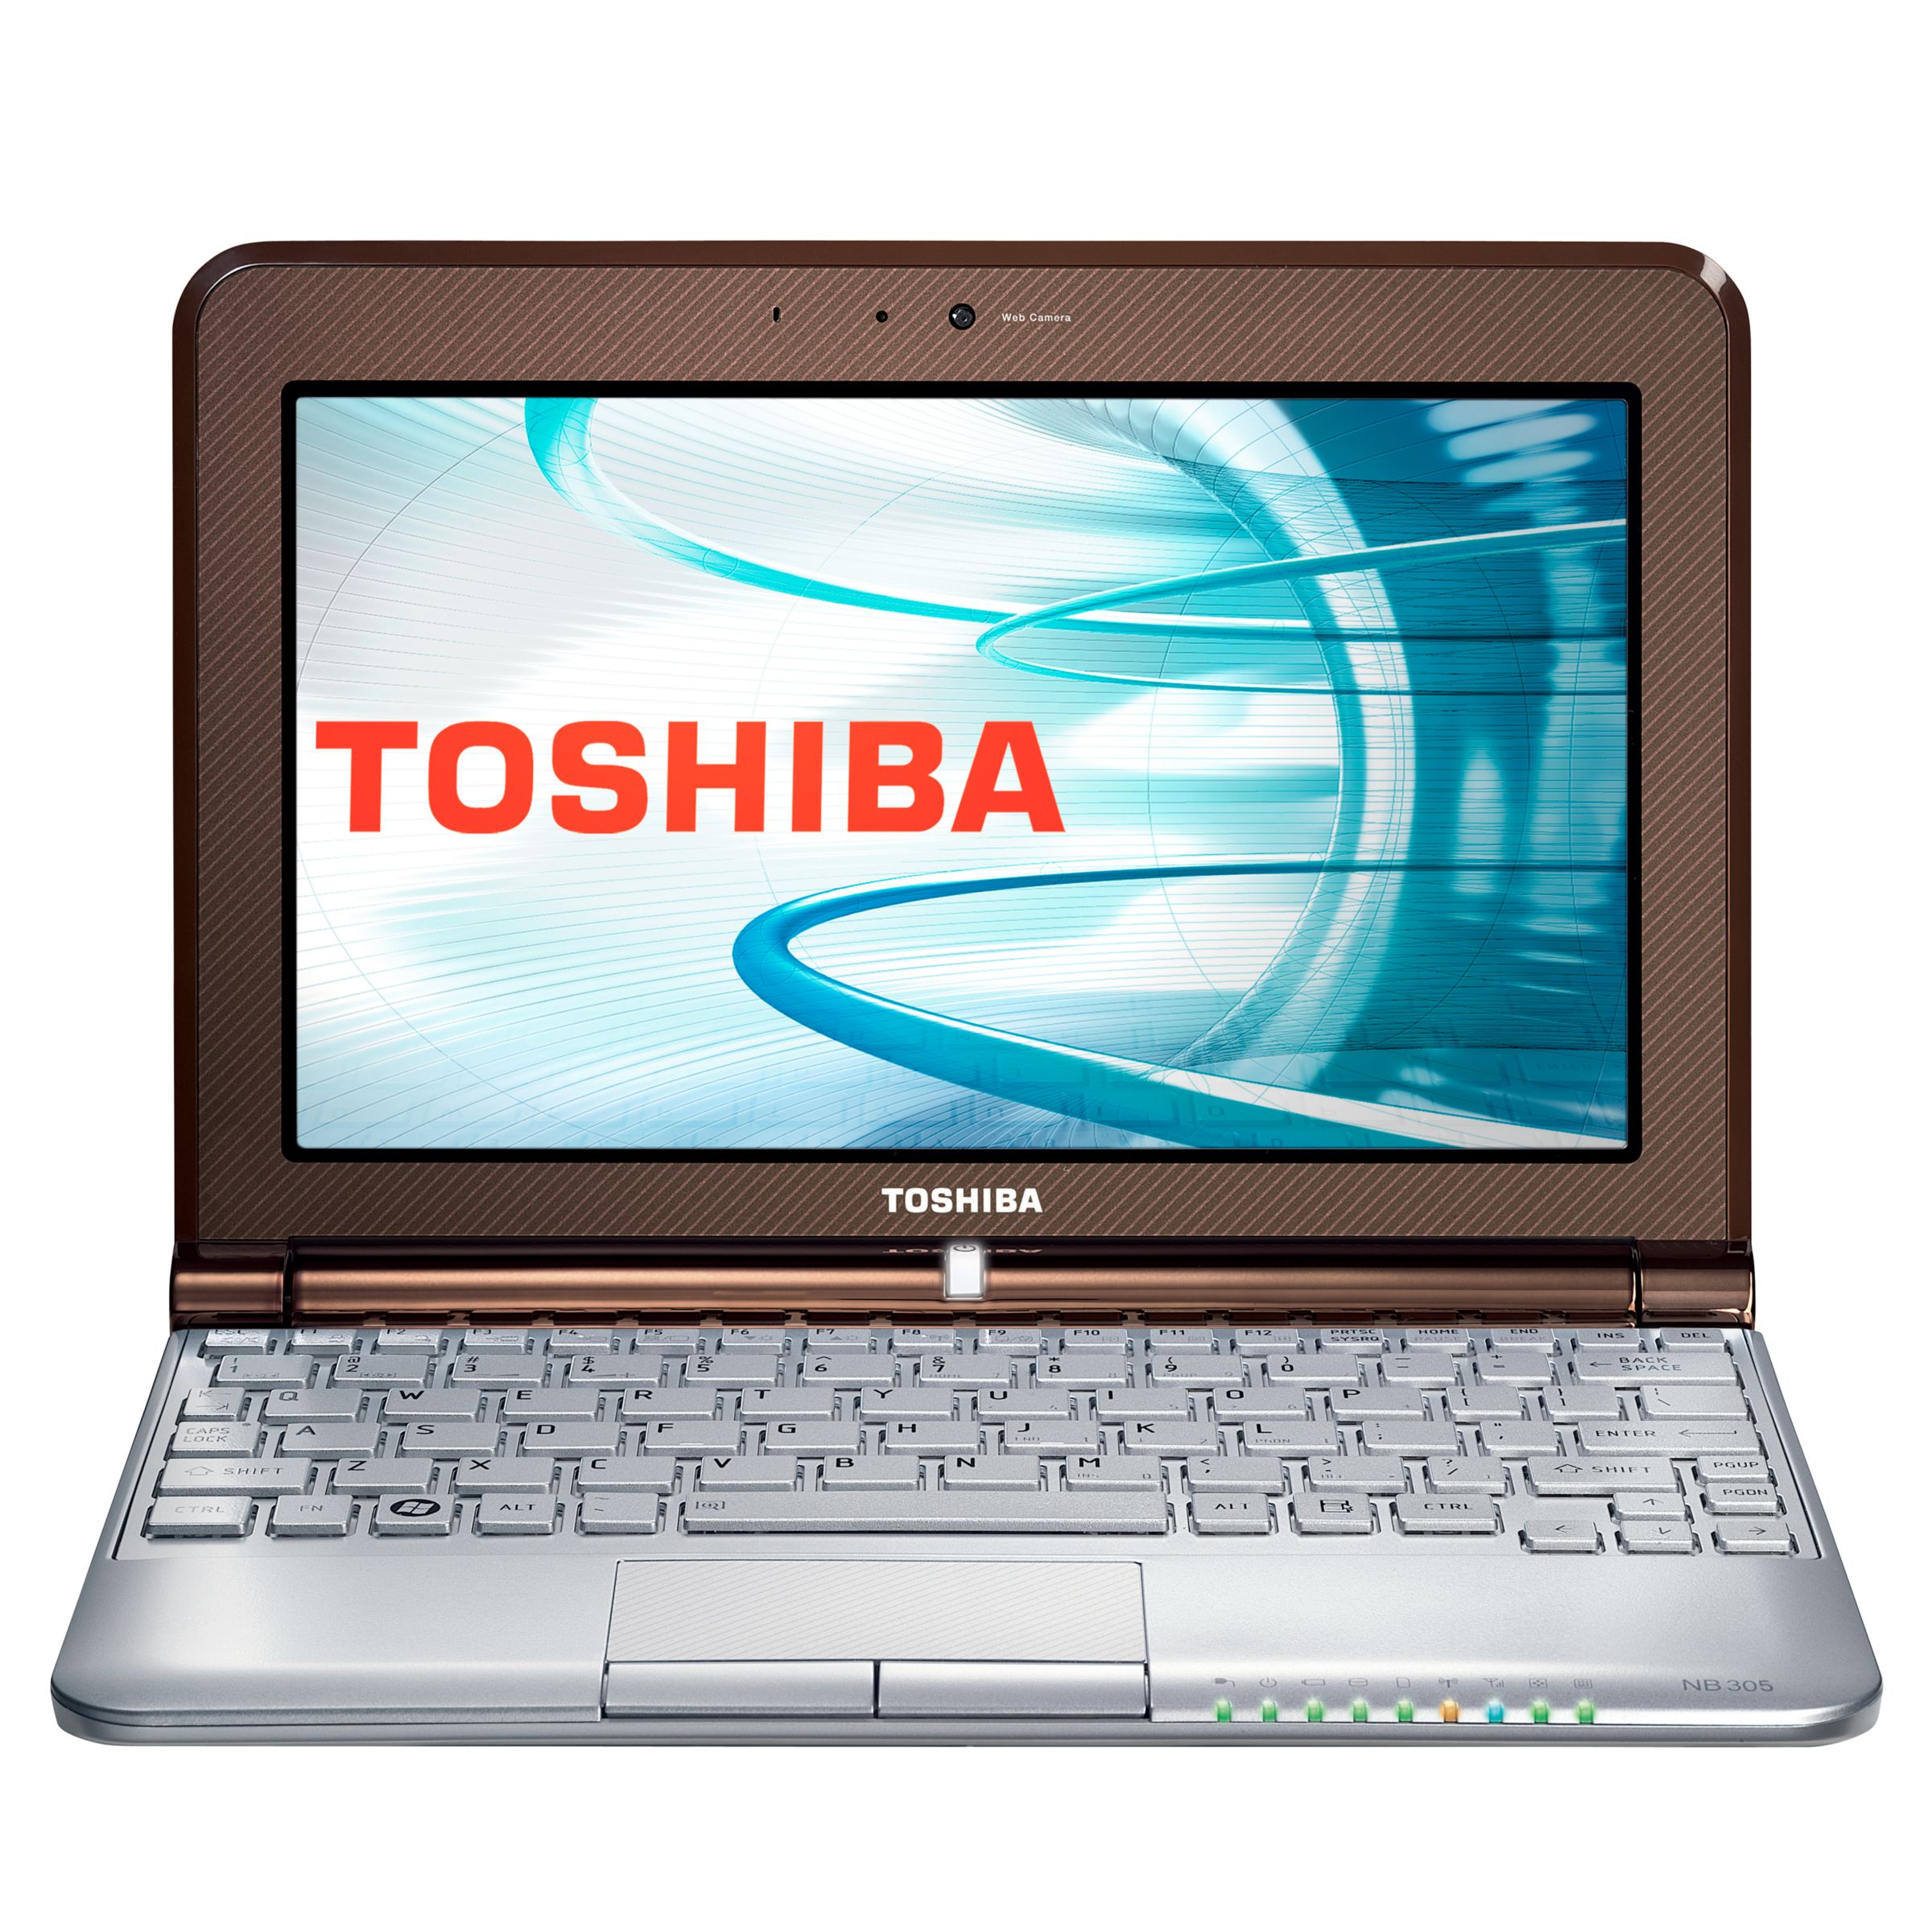 Toshiba NB305-10F Netbook, 1.66GHz with 10.1 Inch Display, Mocha at John Lewis